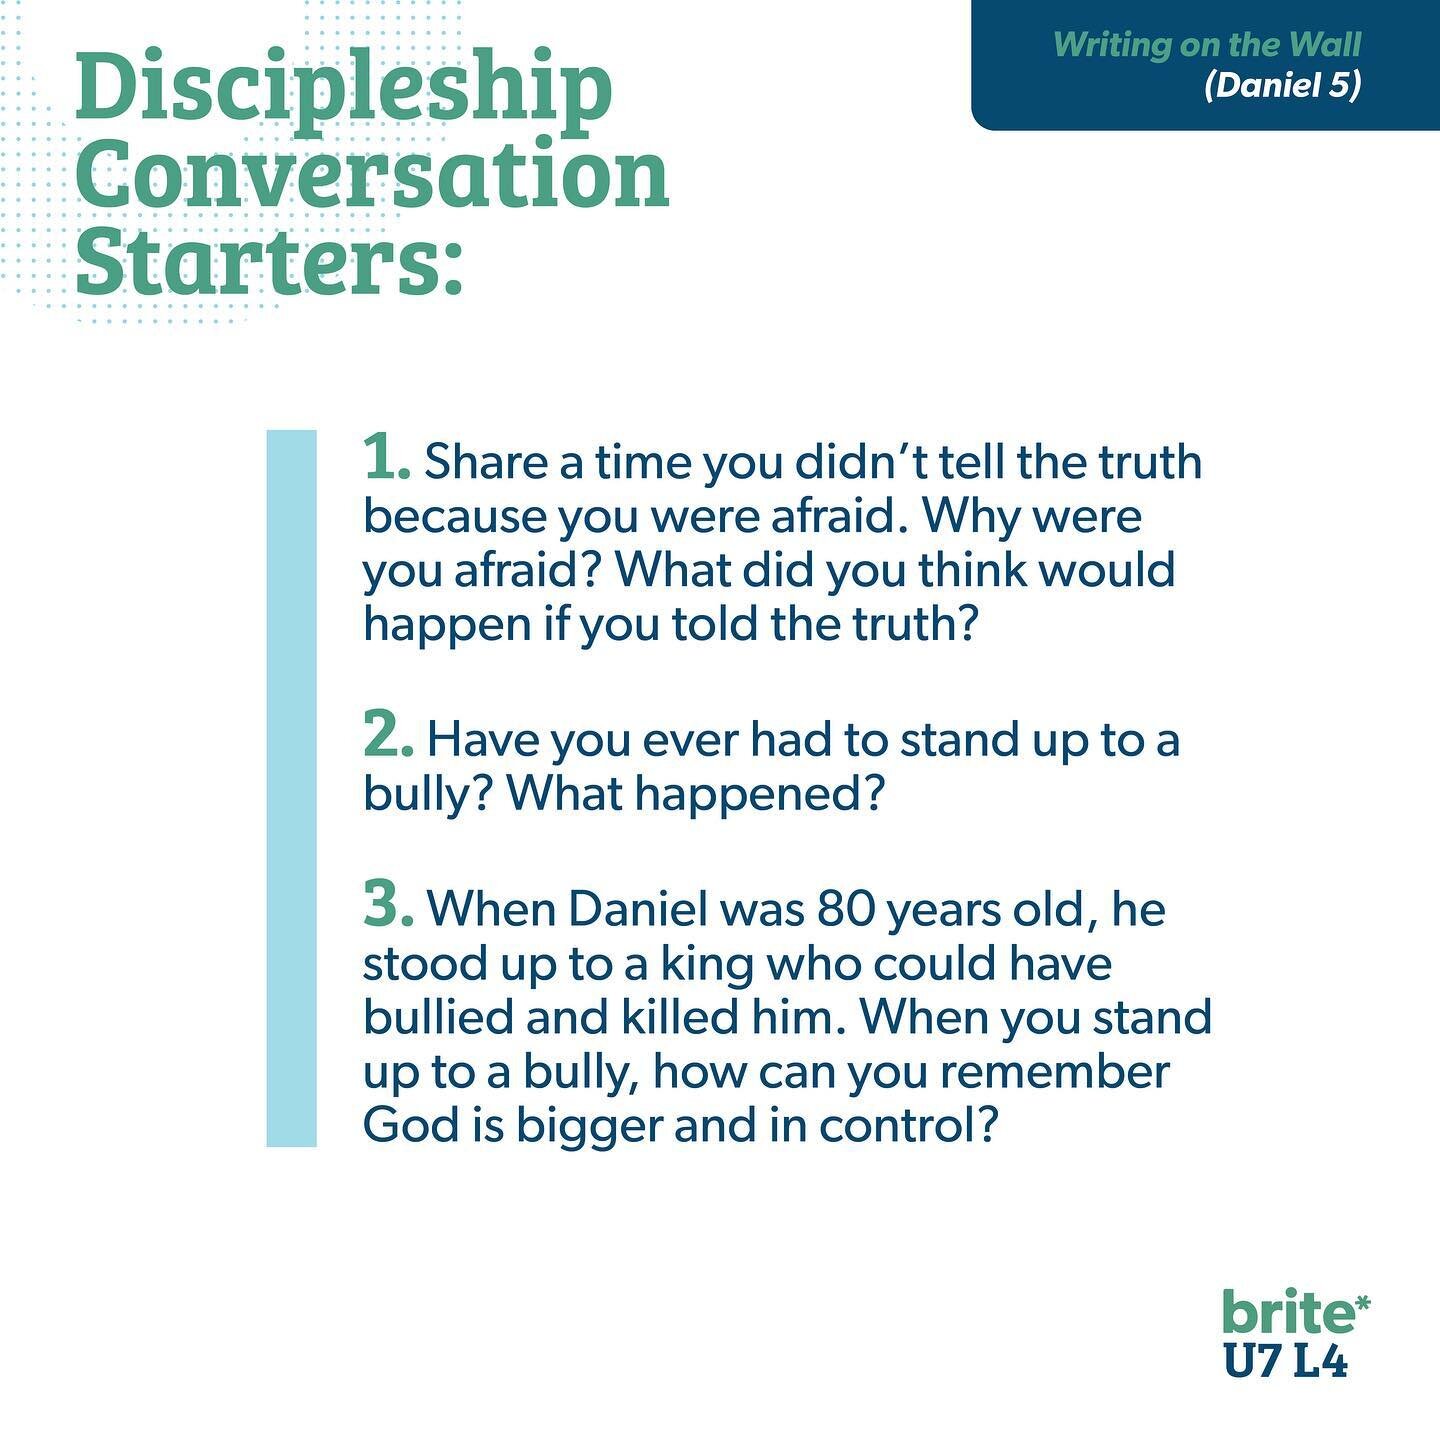 Yesterday Sarah taught about The Writing on the Wall from Daniel 5. Here are some conversation starters to encourage good conversations at home! Missed the Kids Video? You can watch it on our website along with all our past videos! Link in Bio!